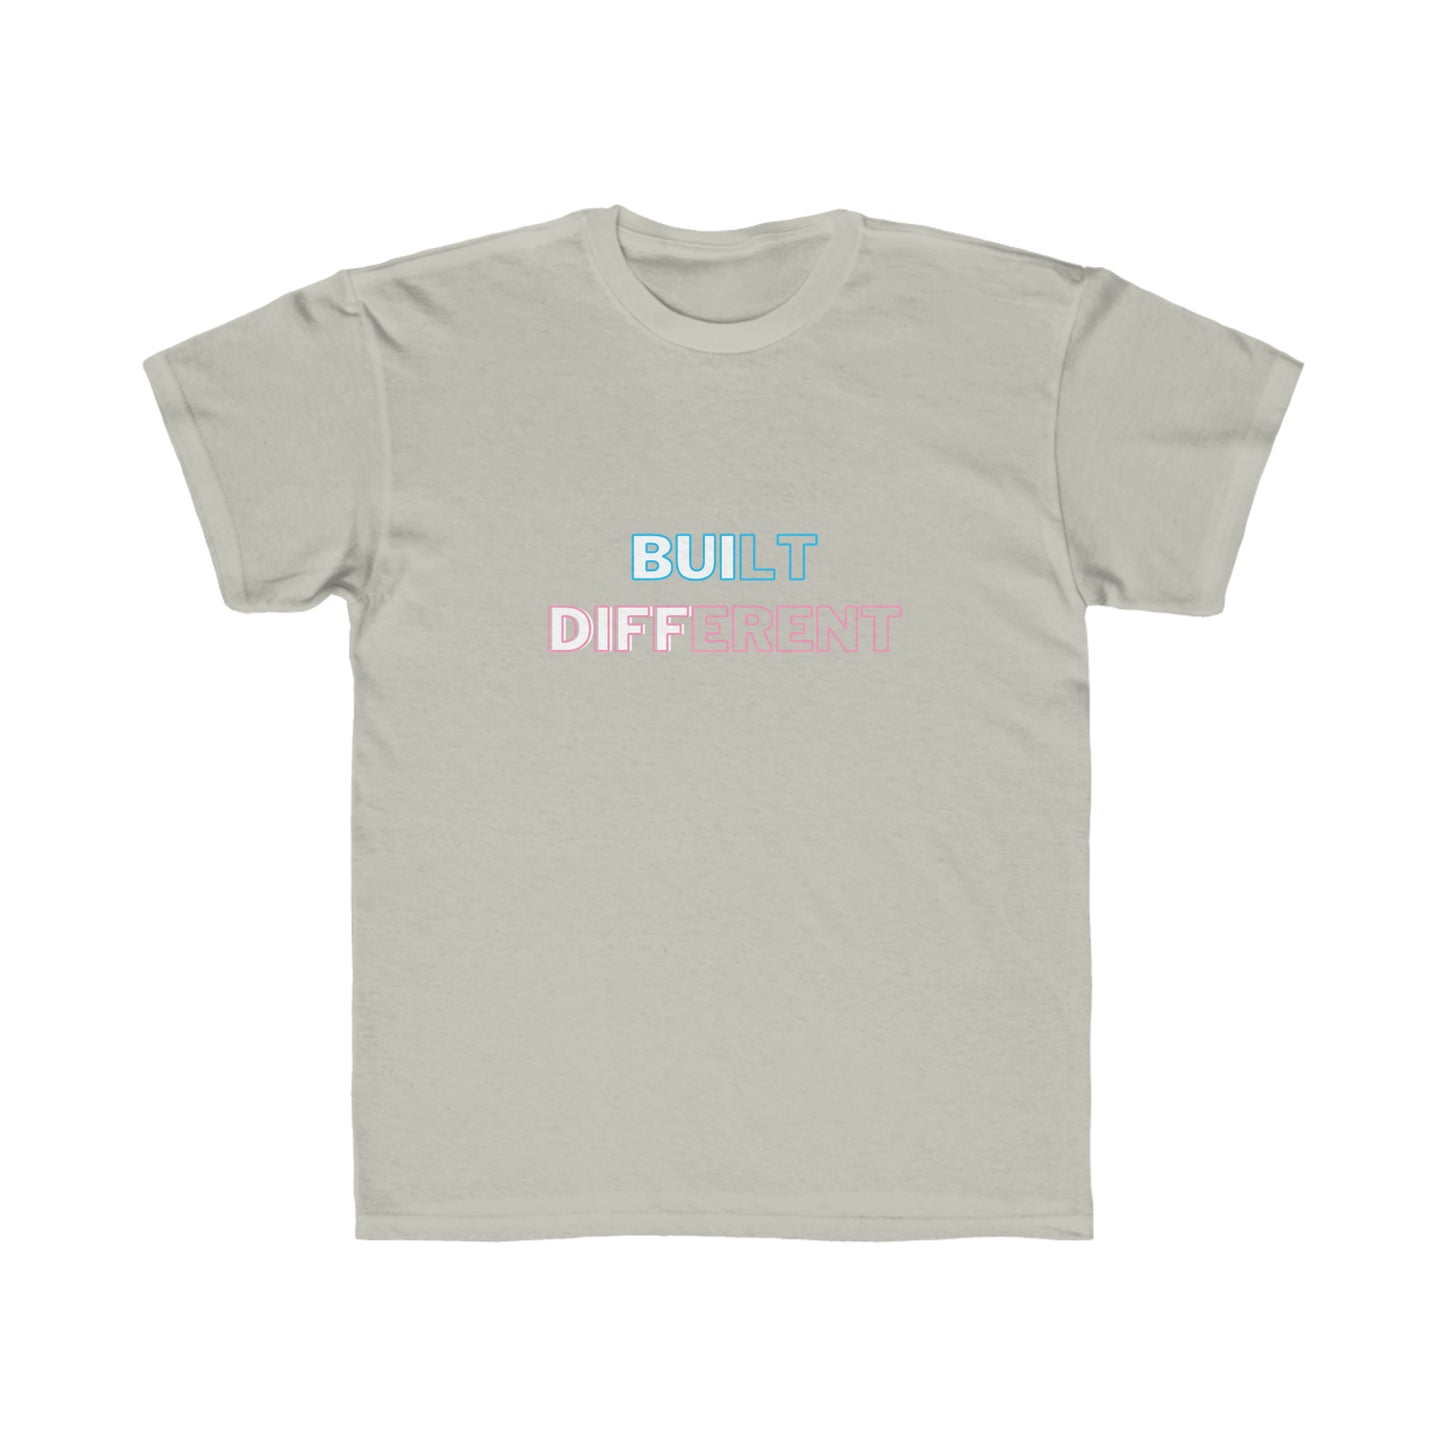 Built Different, inspired by Jase & Pierce - Kids Regular Fit Tee